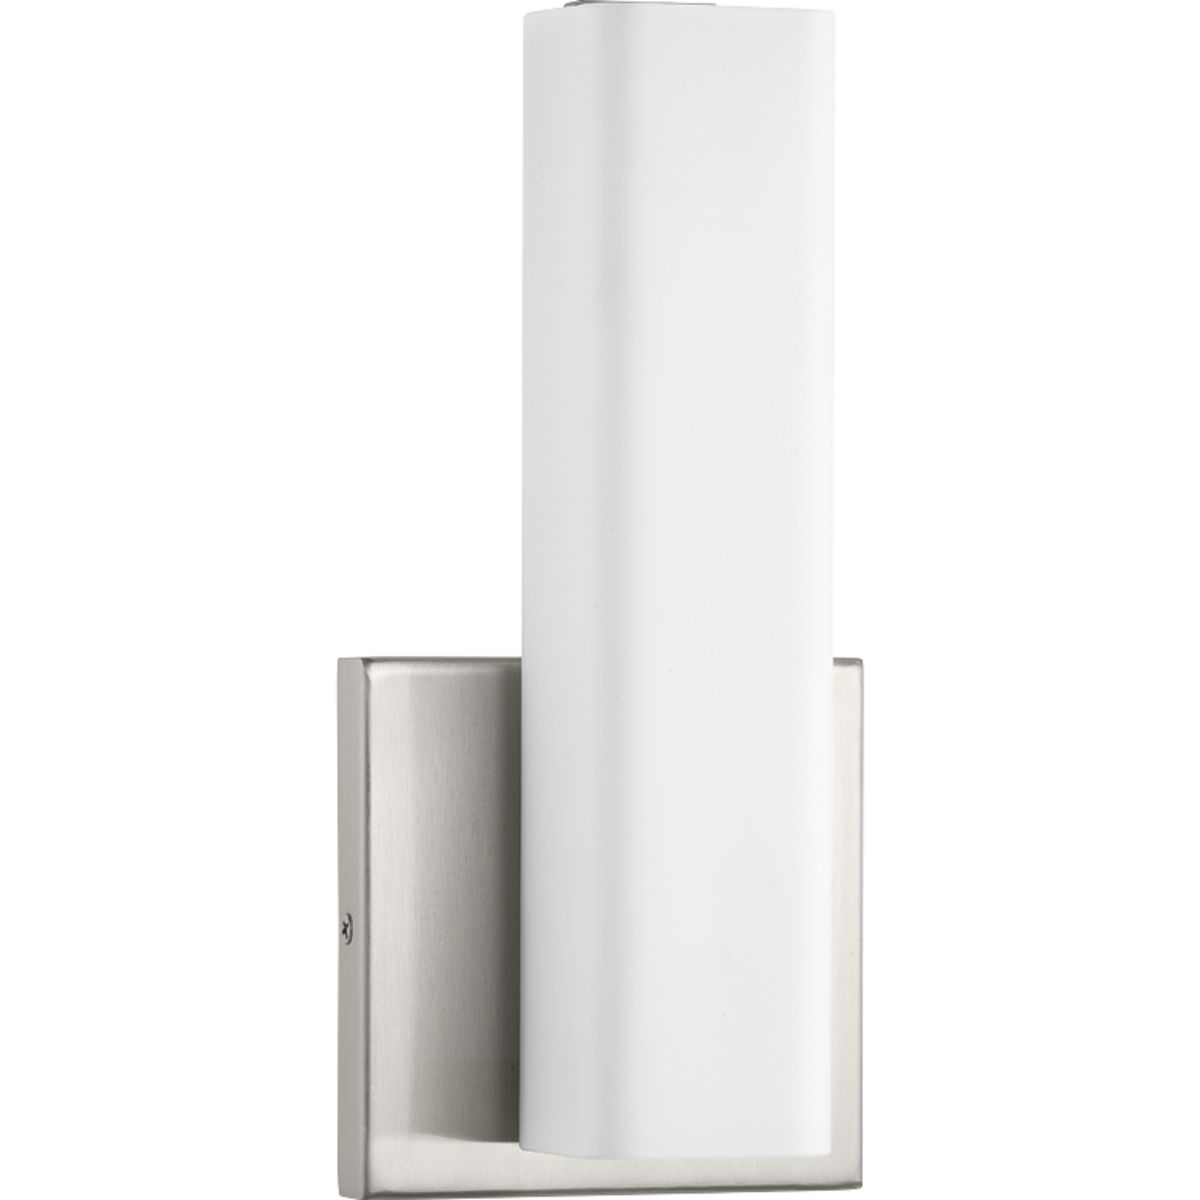 Beam LED vanity and sconces feature a squared, tubular opal glass diffuser paired with a simple, modern metal canopy. An integrated LED source provides a variety of energy and cost savings benefits. Suitable for residential and commercial application...